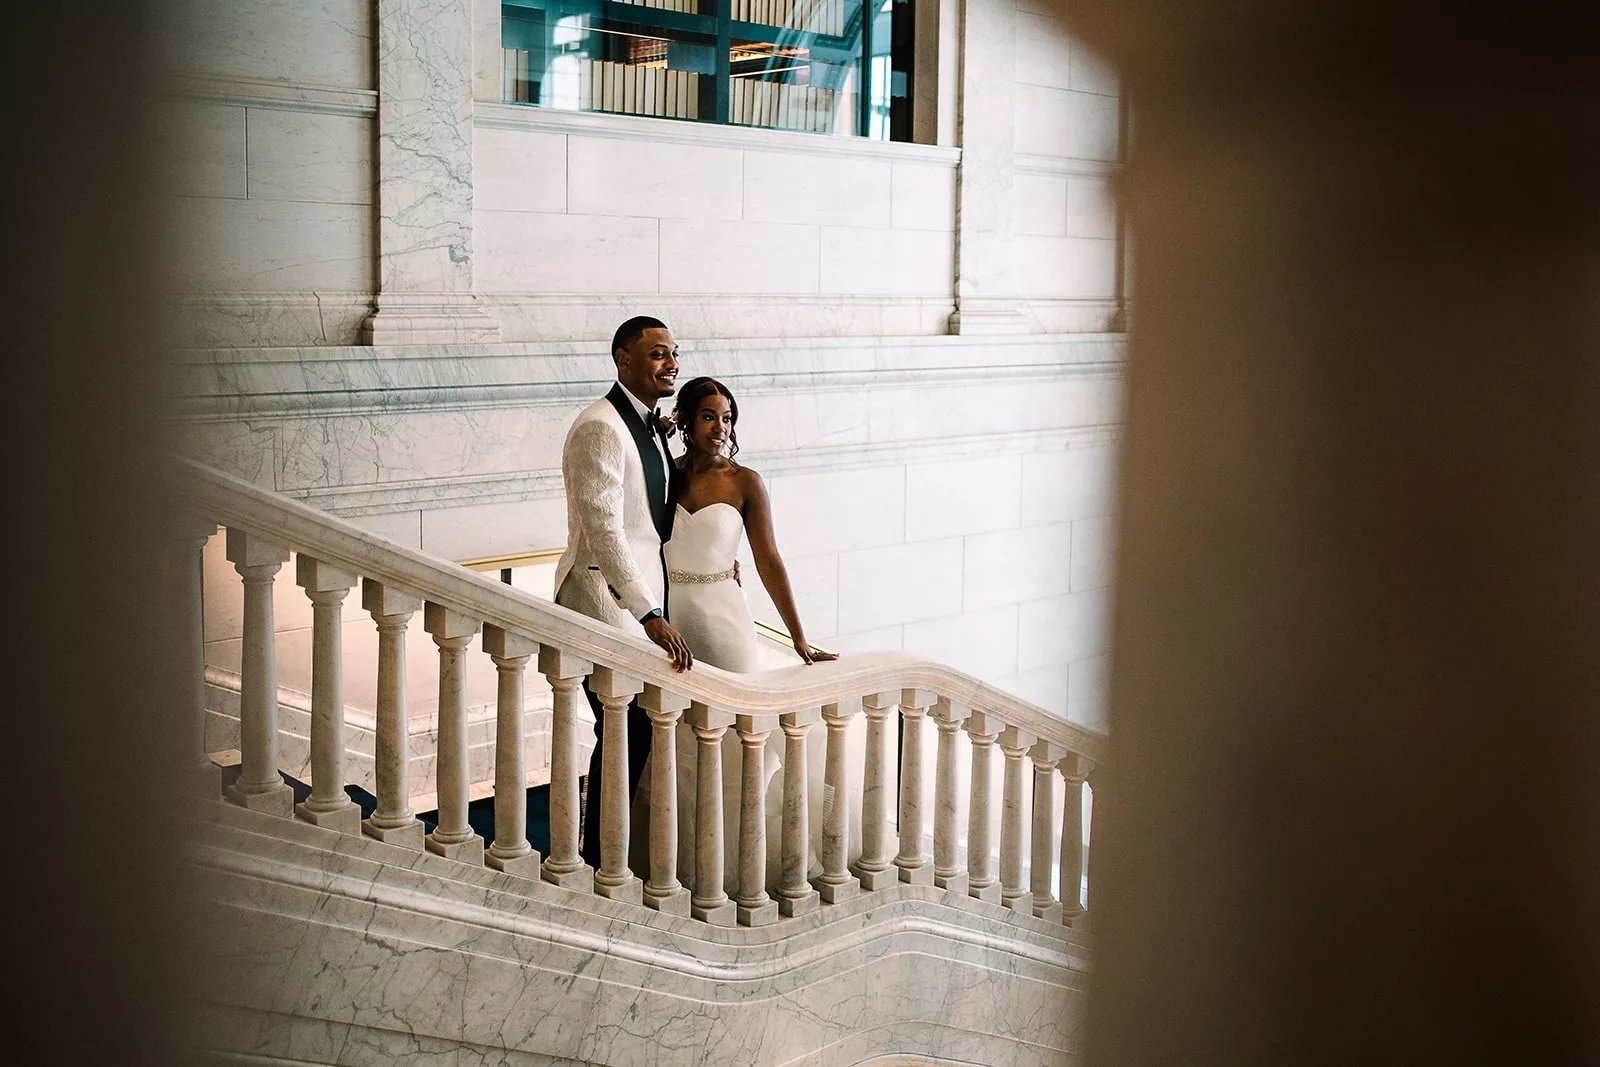 A captivating and elegant image of a couple's wedding celebration, featuring a breathtaking staircase as the backdrop, with the couple holding hands and sharing a tender moment